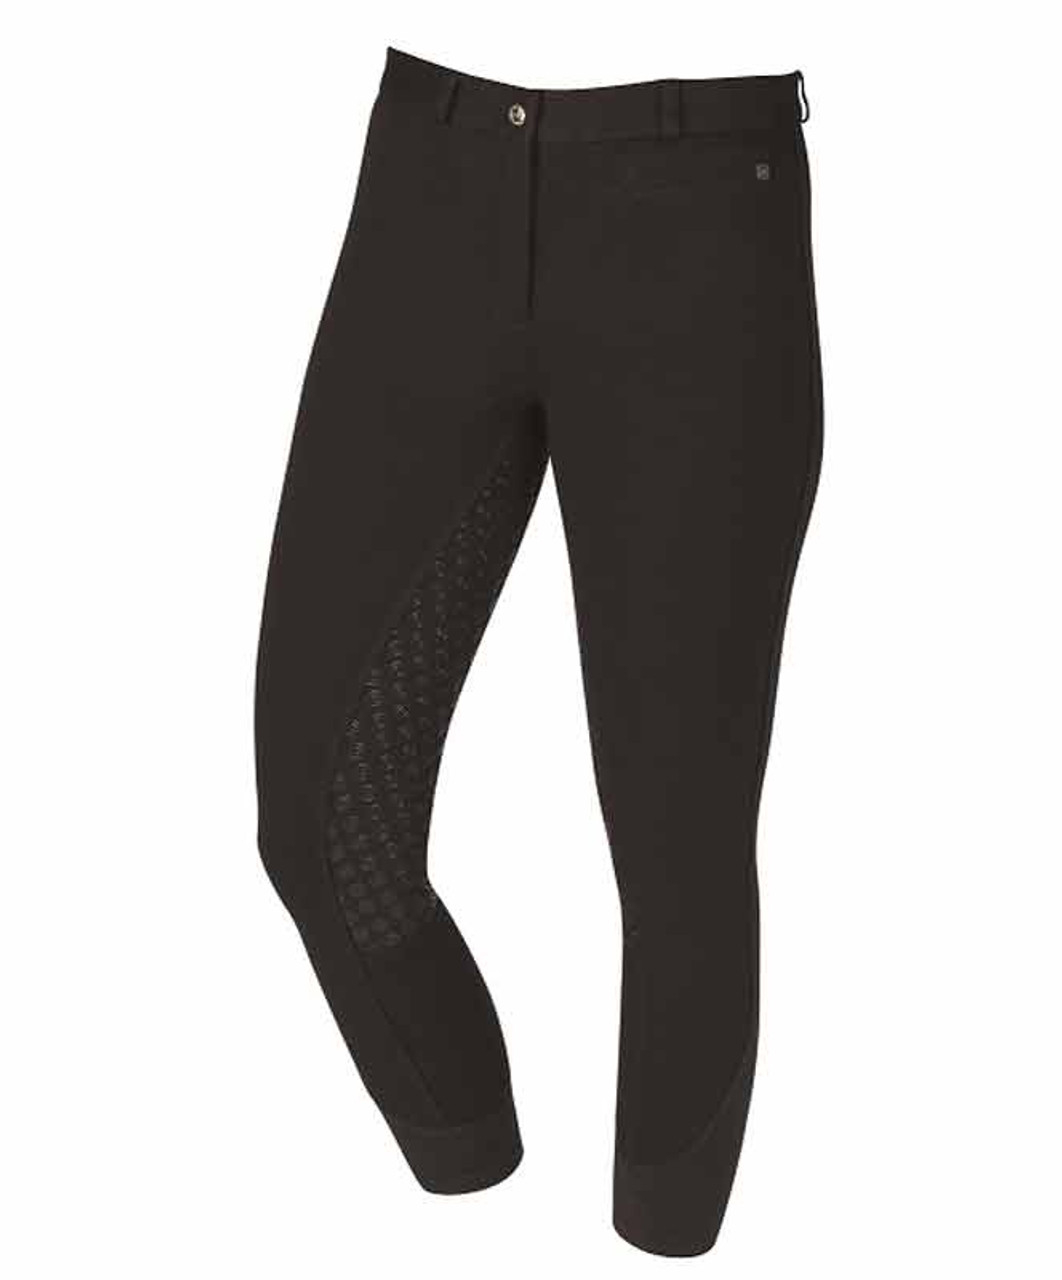 CLEAROUT - Dublin Supa-Fit Zip Up Gel Full Seat Breeches - Sprucewood Tack